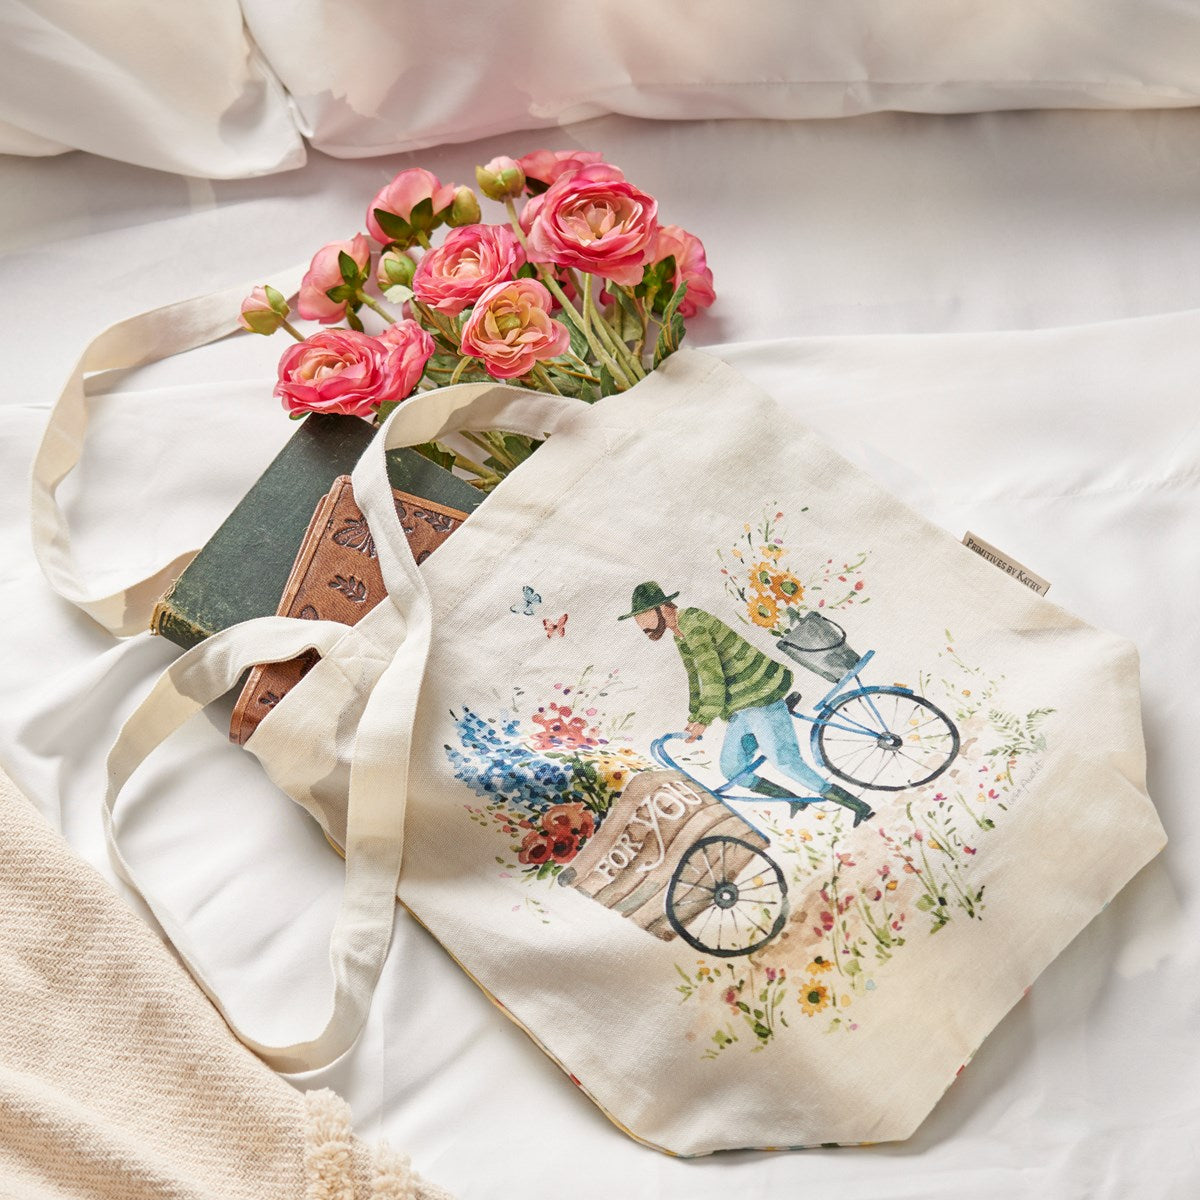 Cotton Tote - Flower Cart Bicycle 117200